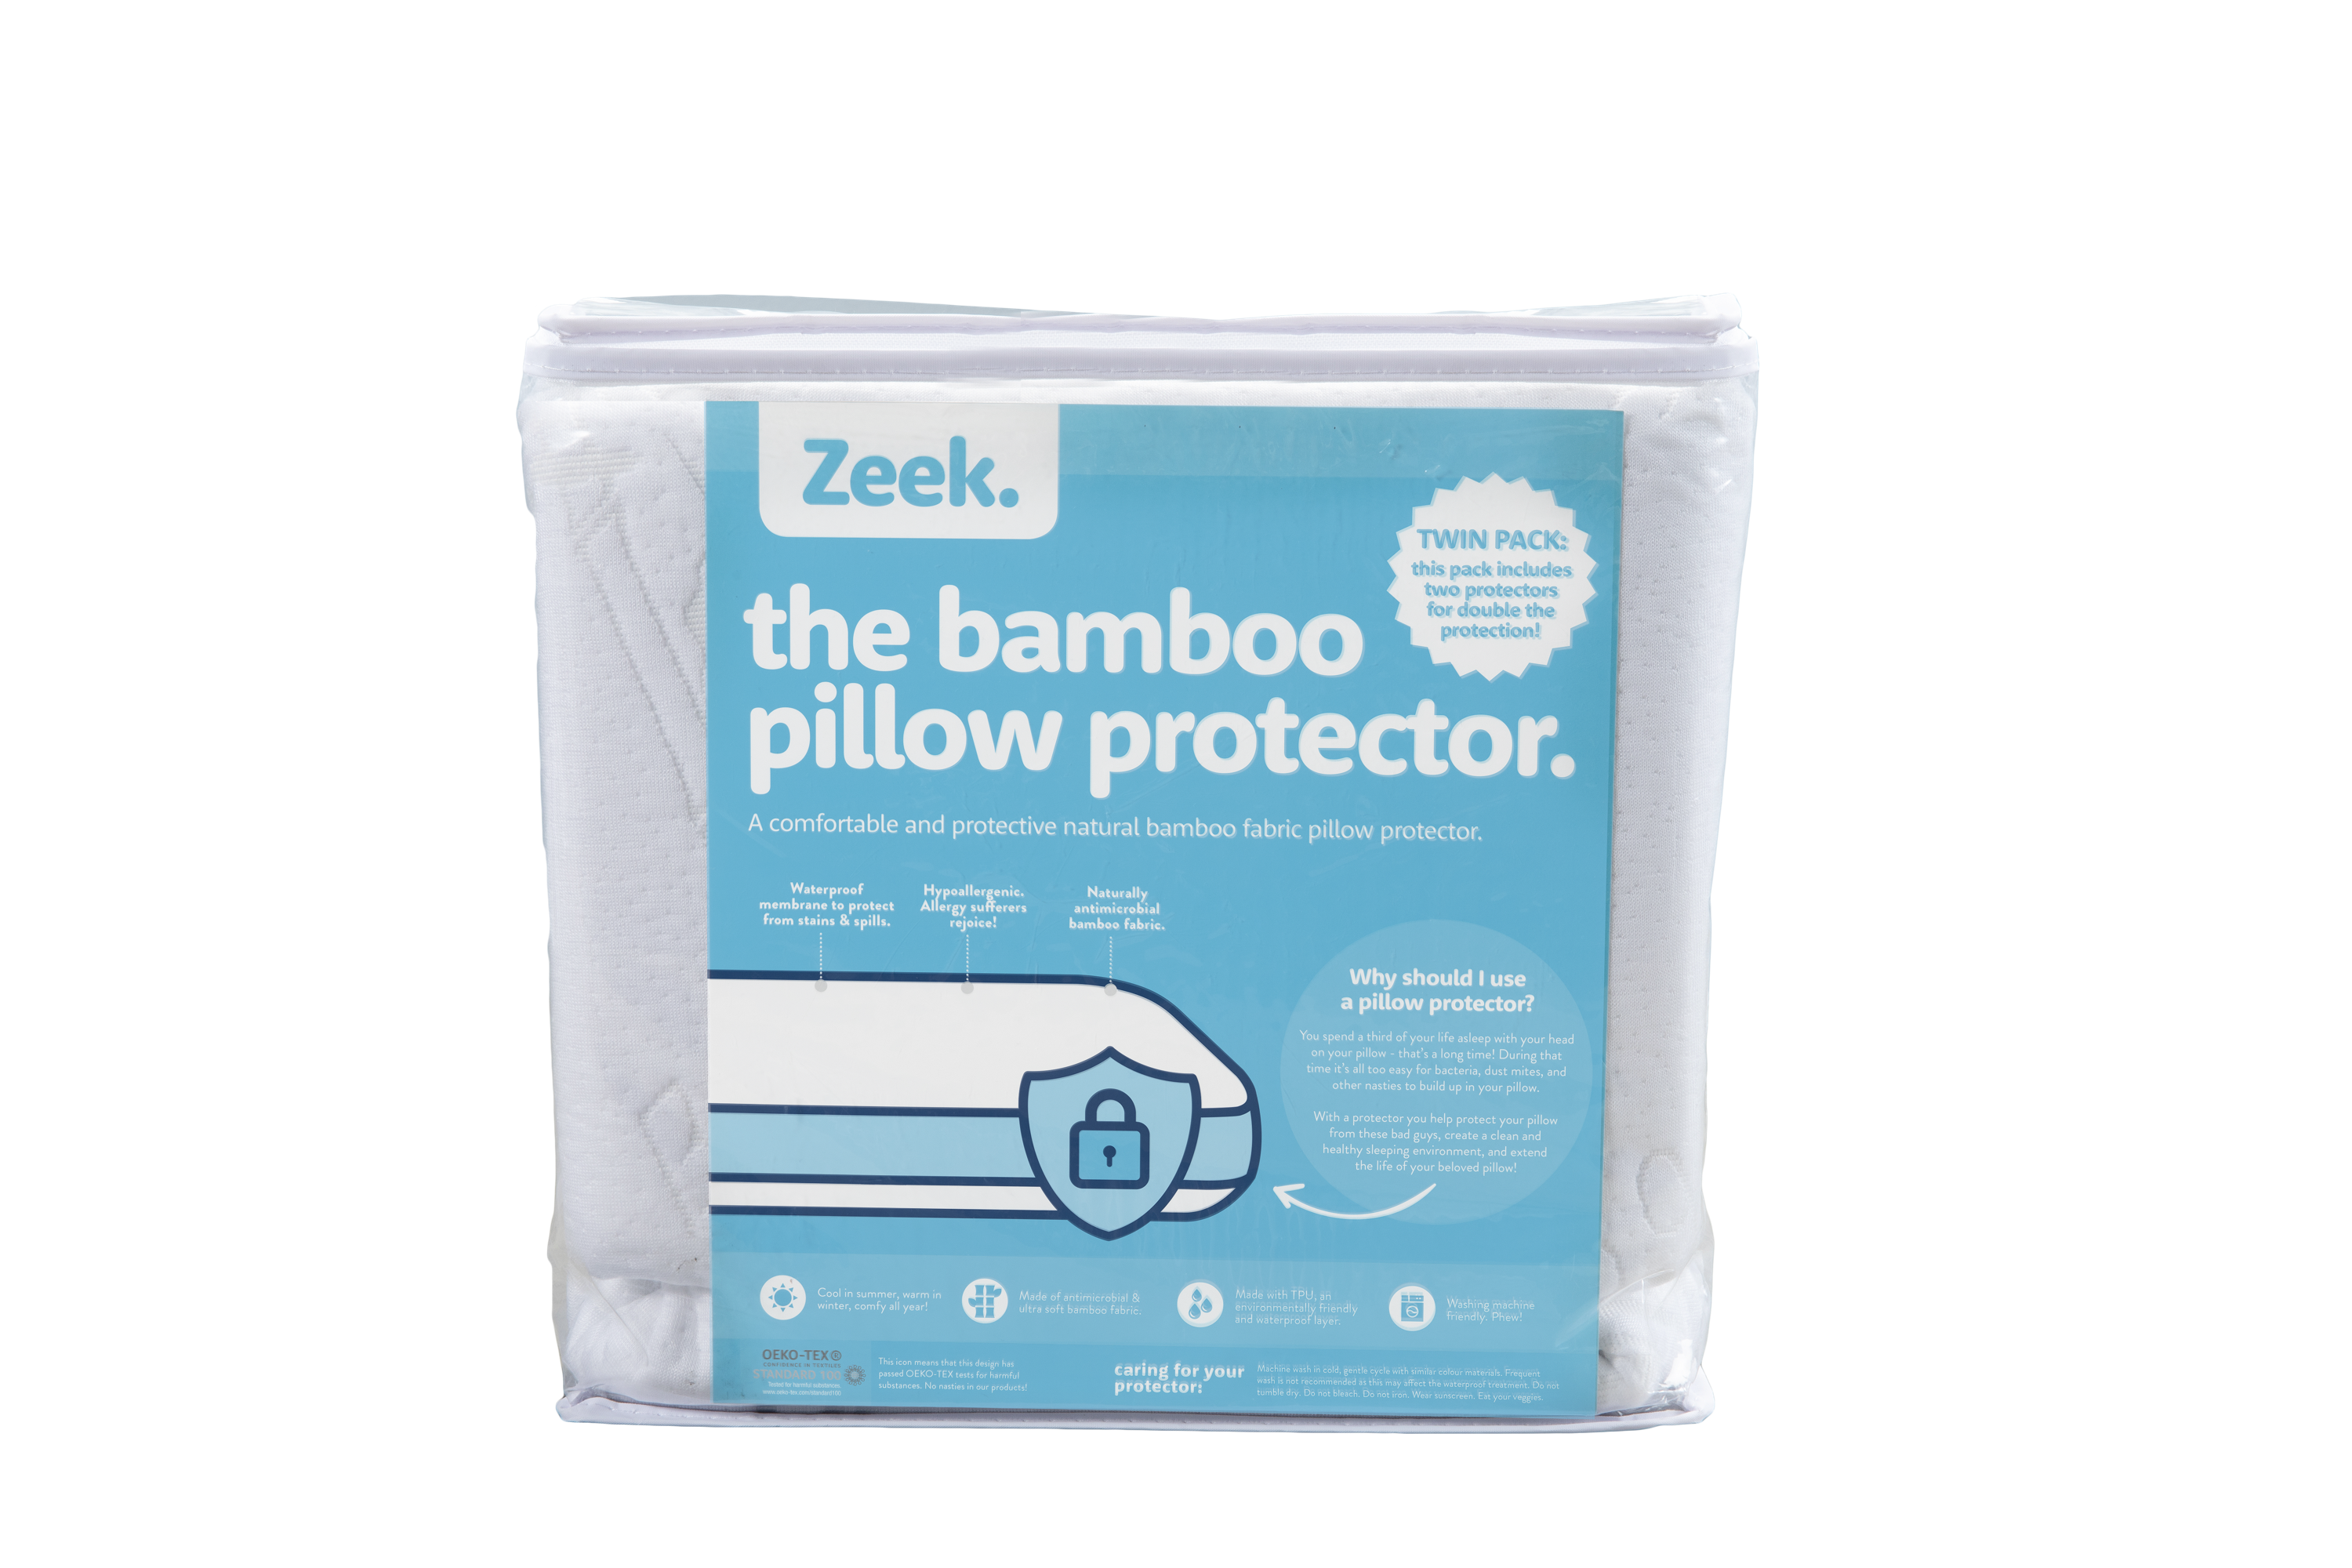 Image of a Zeek Bamboo Pillow Protector Pack.